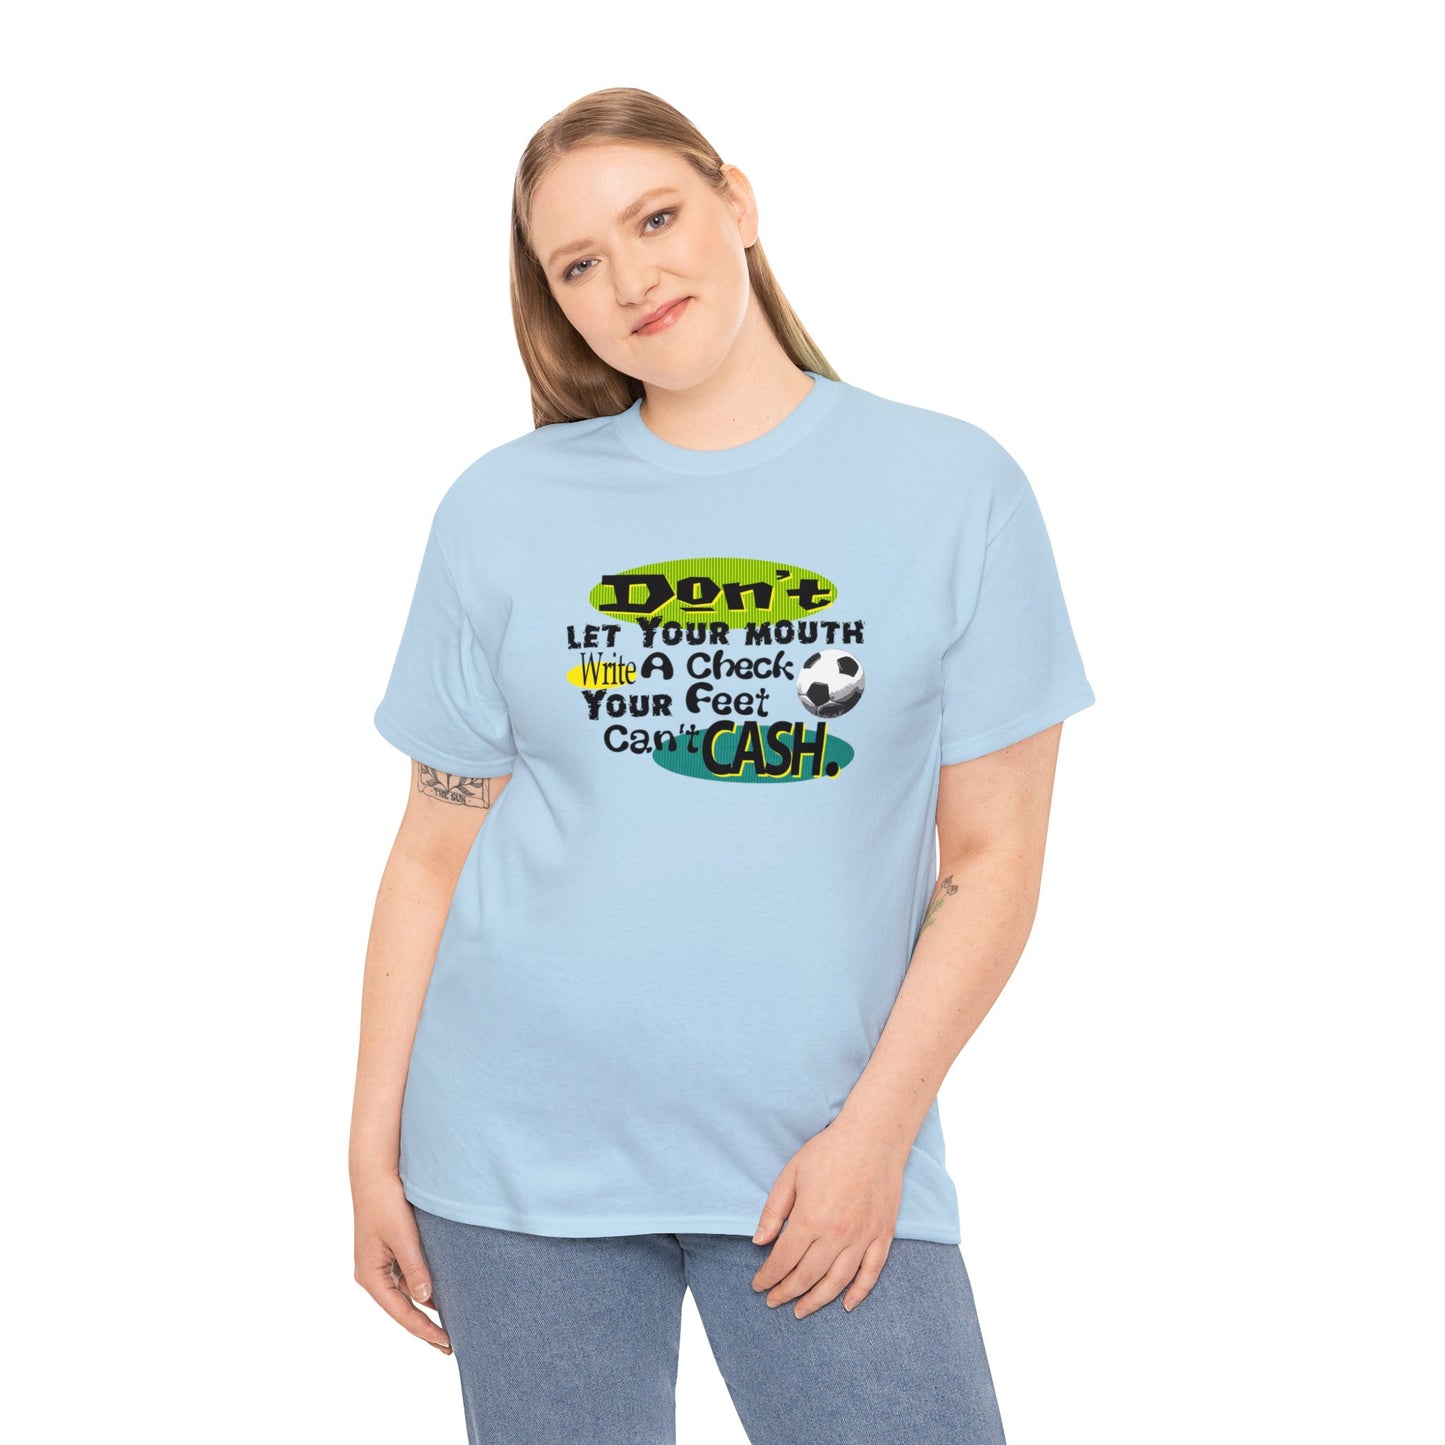 Don't Let Your Mouth Write a Check Your Feet Can't Catch, Funny Soccer T-Shirt, Soccer Ball, Whimsical Soccer T-Shirt, Fun Soccer Gift,